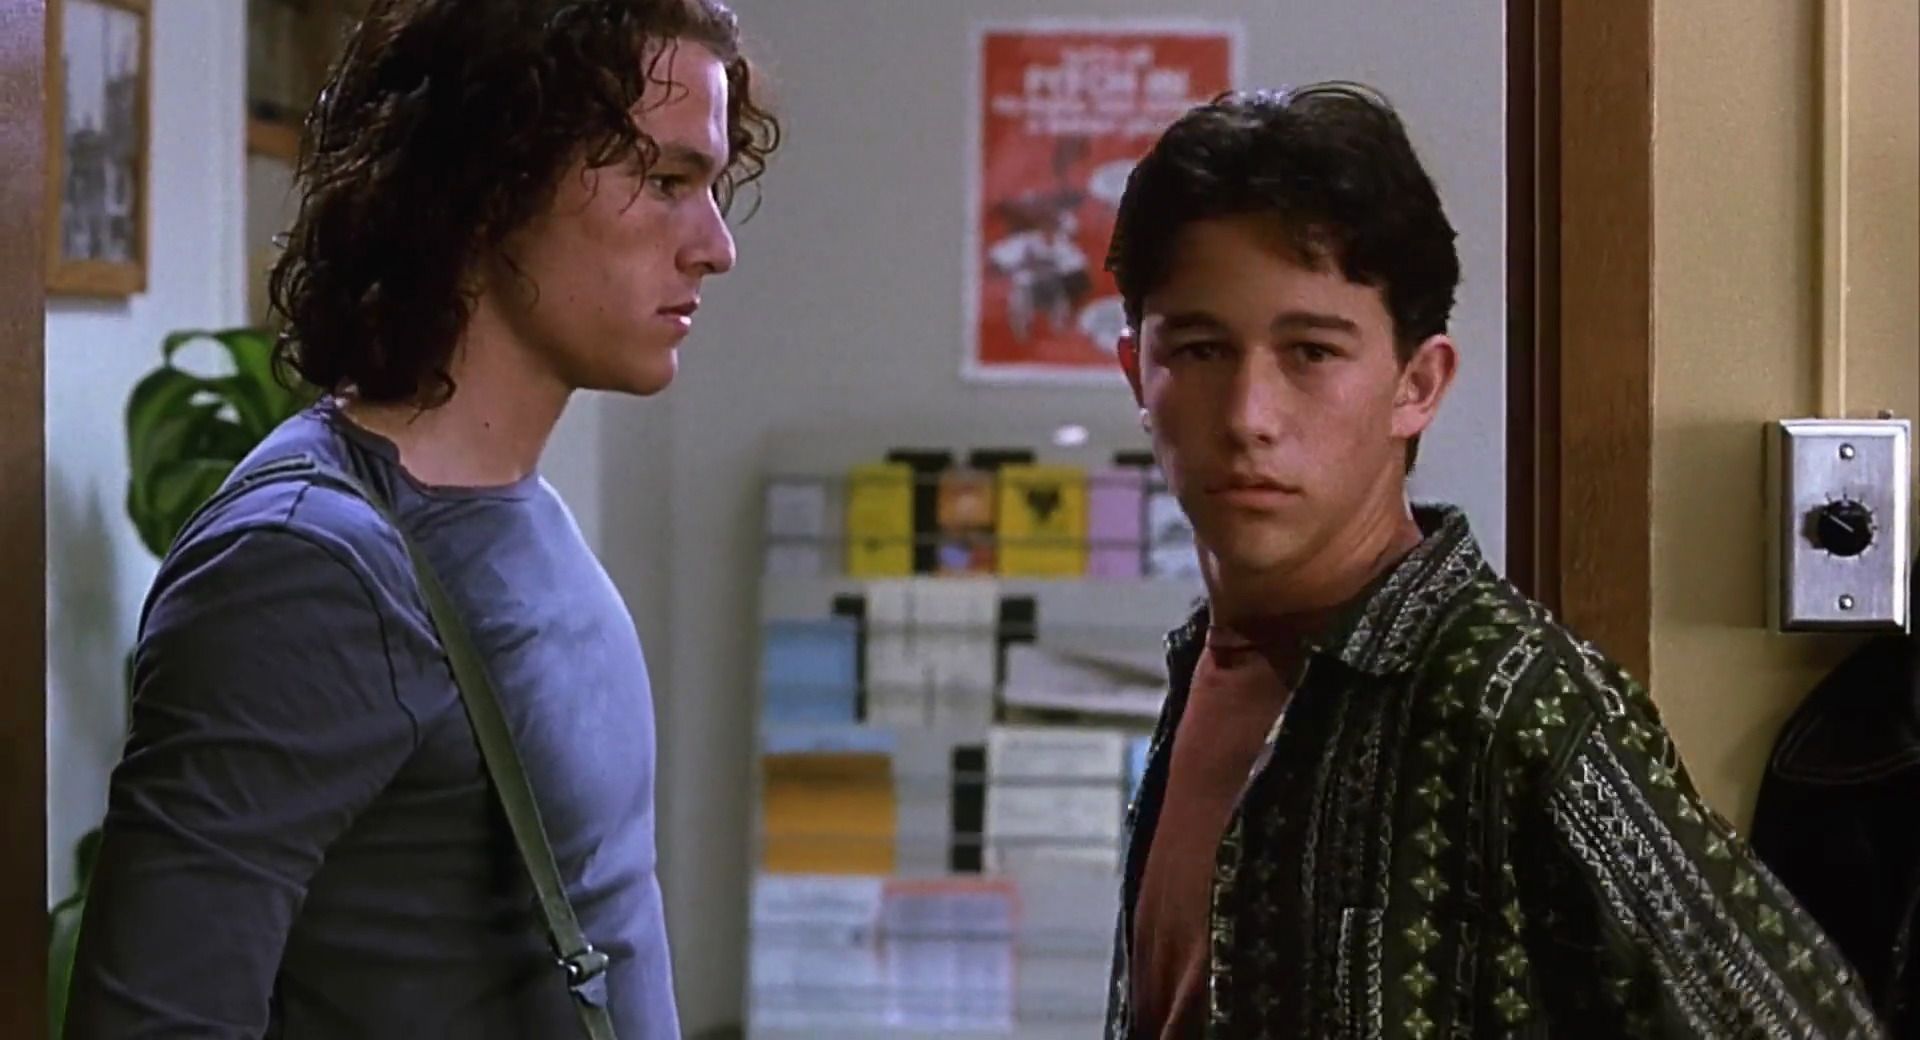 Ledger and Gordon-Levitt in 10 Things I Hate About You